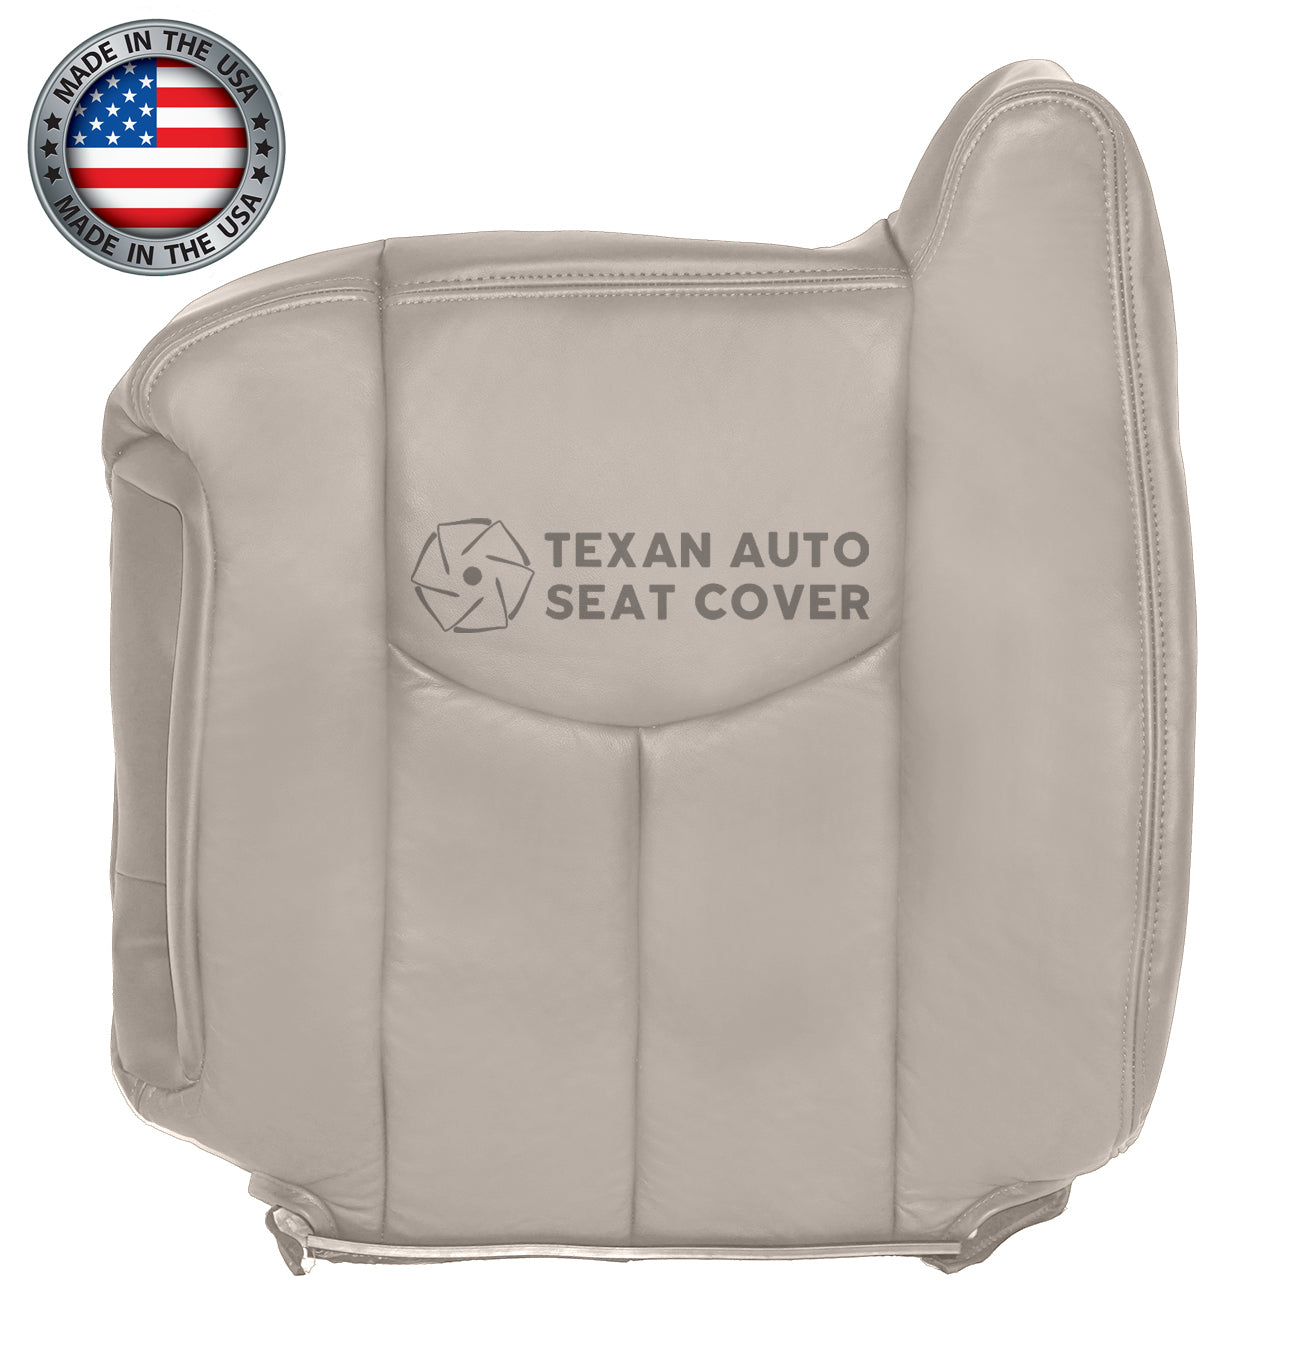 2003, 2004, 2005, 2006 Chevy Tahoe/Suburban 1500 2500 LT, LS, Z71, 2WD, 4X4 Driver Side Lean Back  Leather Replacement Cover Shale